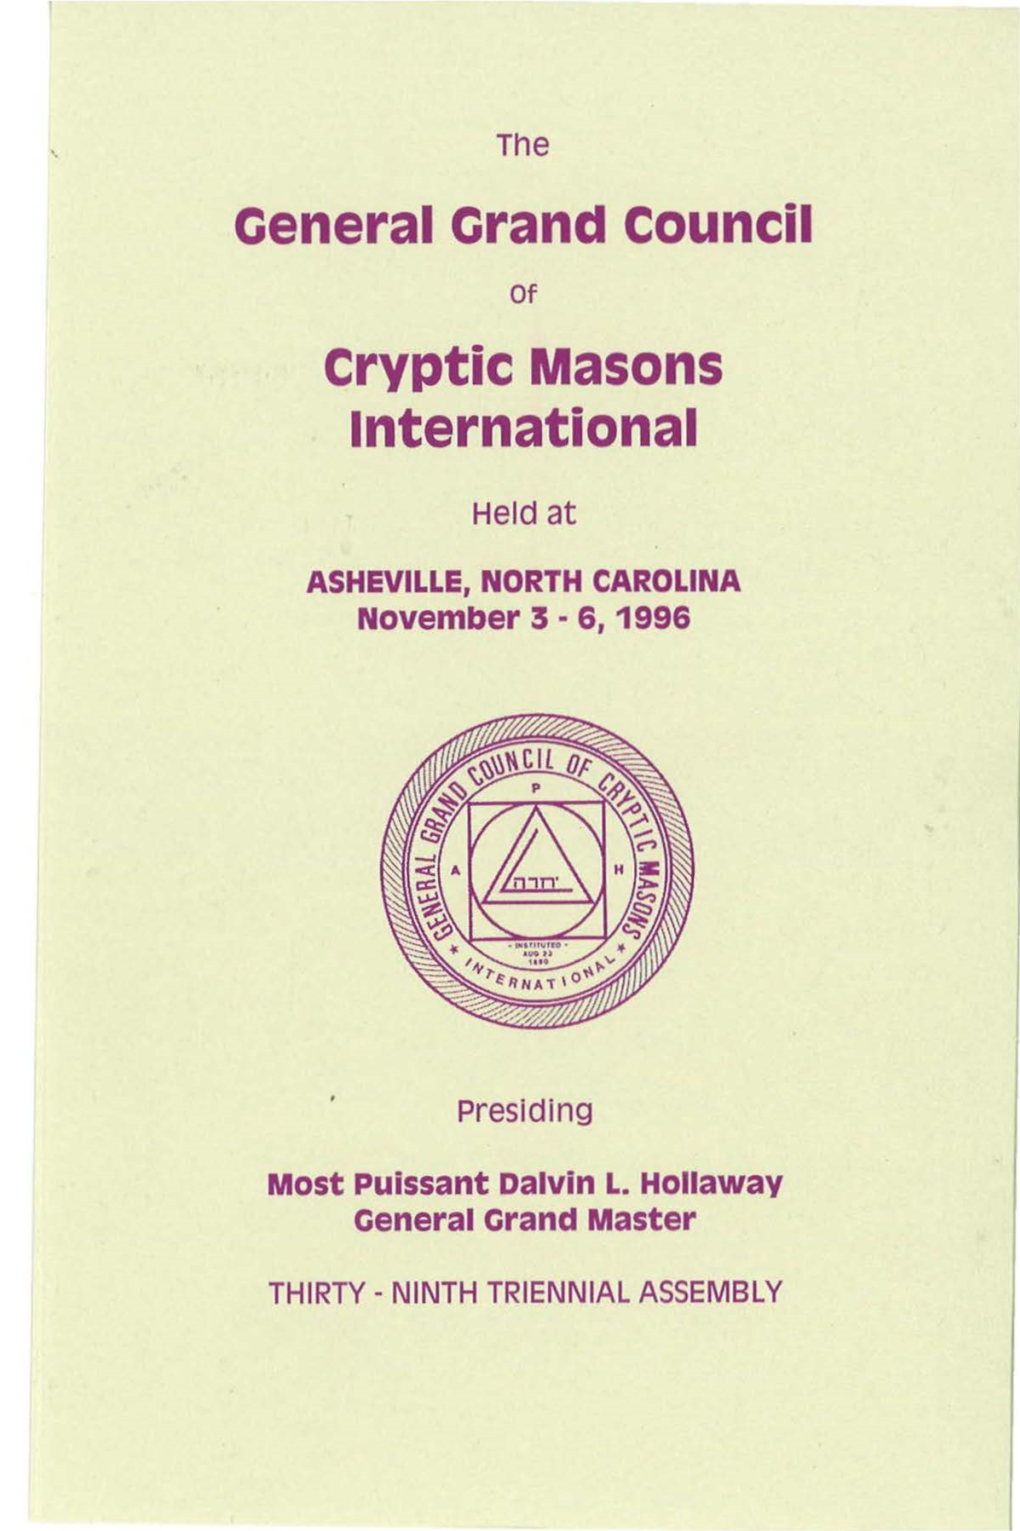 CENERAL CRAND COUNCIL CRYPTIC MASONS INTERNATIONAL As Revised to September 14, 1993